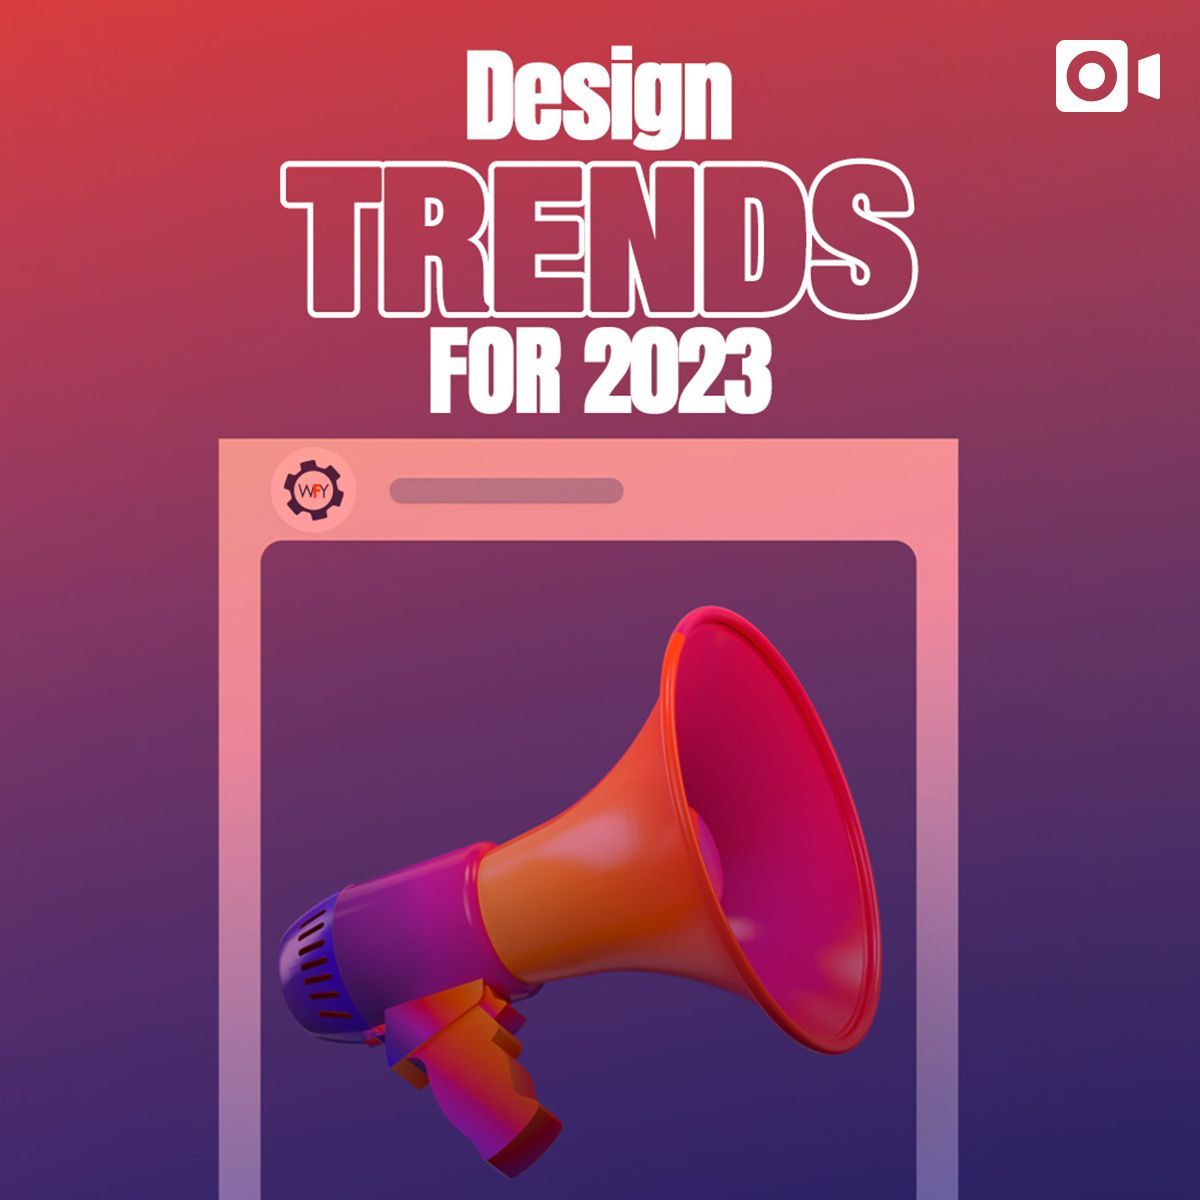 Design trends for 2023